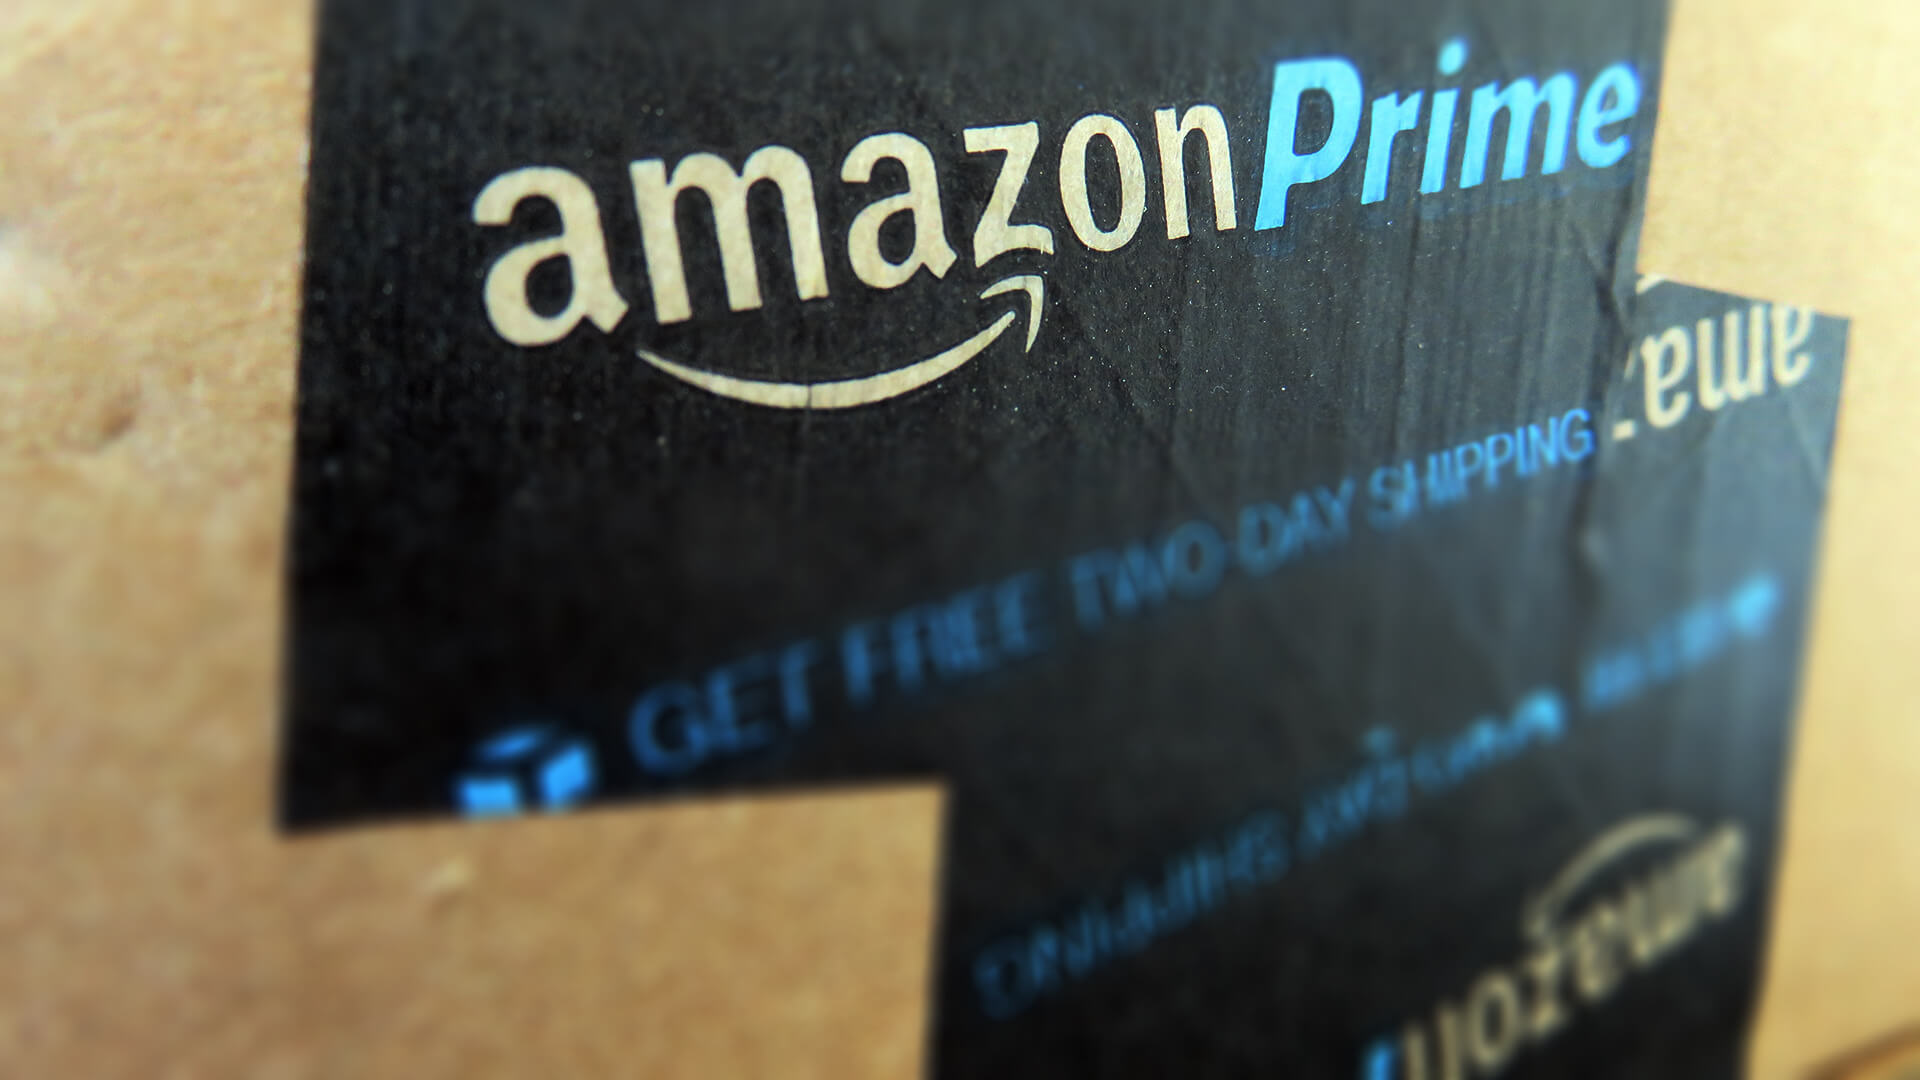 Amazon Prime Day, summer's 'Black Friday', becomes 2-day sale